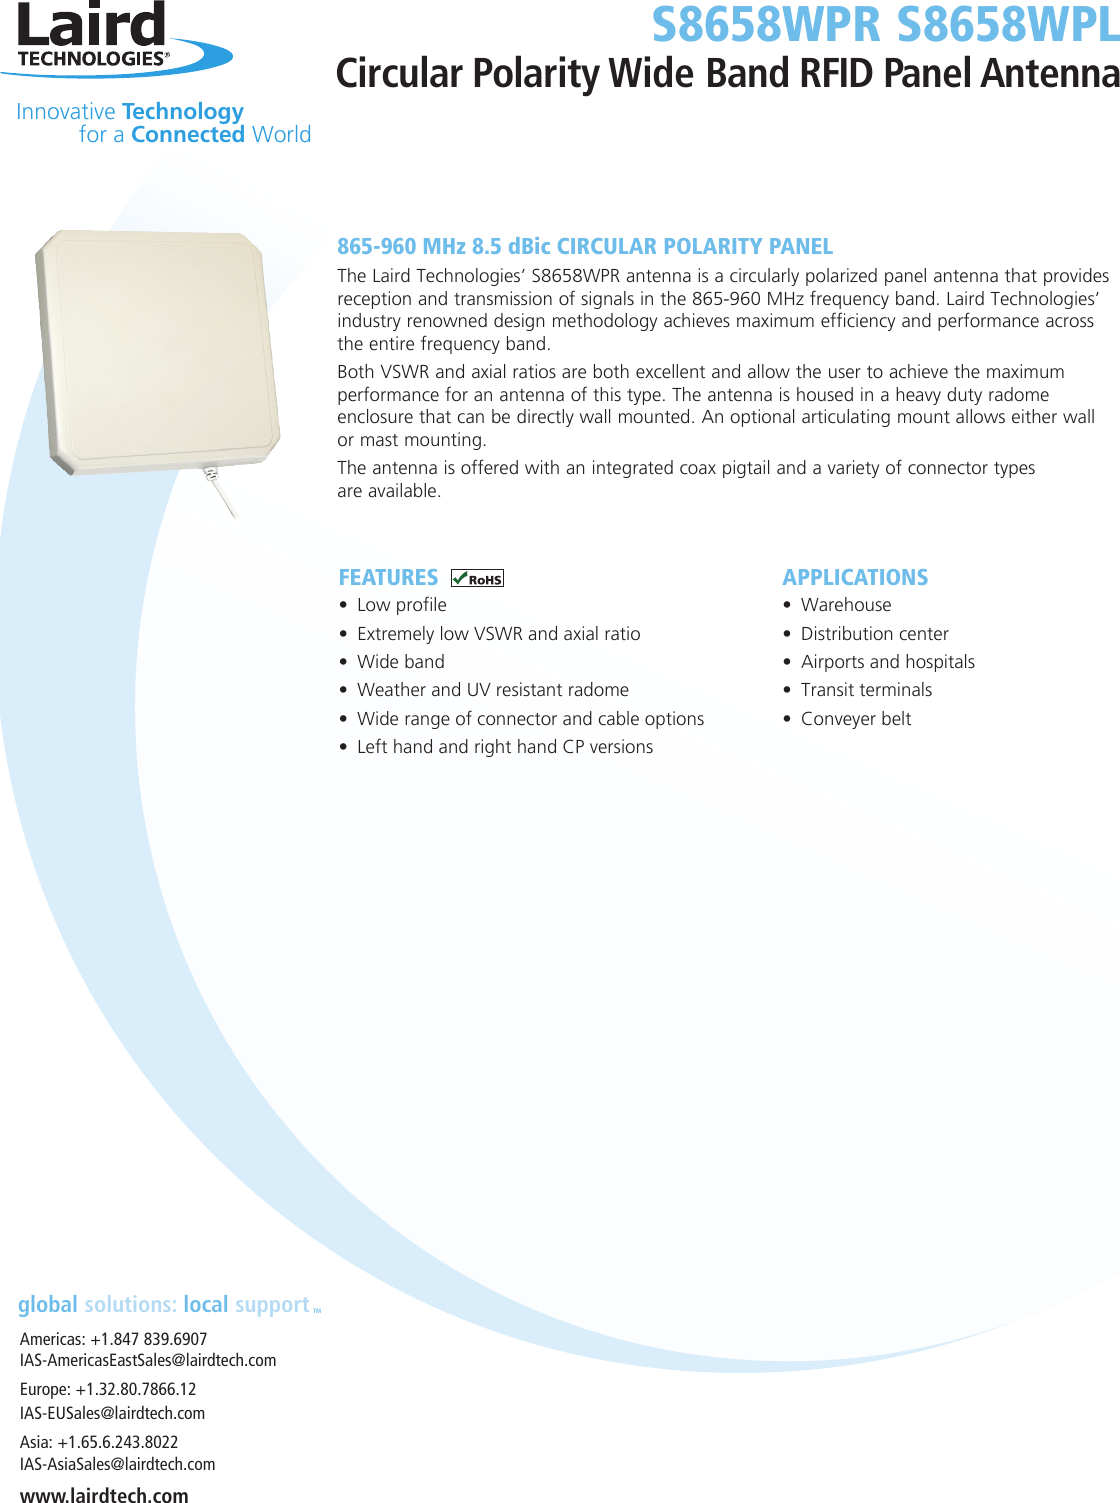 Innovative Technology  for a Connected WorldS8658WPR S8658WPLCircular Polarity Wide Band RFID Panel Antennaglobal solutions: local supportTMAmericas: +1.847 839.6907IAS-AmericasEastSales@lairdtech.comEurope: +1.32.80.7866.12IAS-EUSales@lairdtech.comAsia: +1.65.6.243.8022 IAS-AsiaSales@lairdtech.comwww.lairdtech.comFEATURES• Low profile• Extremely low VSWR and axial ratio• Wide band• Weather and UV resistant radome• Wide range of connector and cable options• Left hand and right hand CP versionsAPPLICATIONS• Warehouse• Distribution center• Airports and hospitals• Transit terminals• Conveyer belt865-960 MHz 8.5 dBic CIRCULAR POLARITY PANELThe Laird Technologies’ S8658WPR antenna is a circularly polarized panel antenna that provides reception and transmission of signals in the 865-960 MHz frequency band. Laird Technologies’ industry renowned design methodology achieves maximum efficiency and performance across the entire frequency band. Both VSWR and axial ratios are both excellent and allow the user to achieve the maximum performance for an antenna of this type. The antenna is housed in a heavy duty radome enclosure that can be directly wall mounted. An optional articulating mount allows either wall  or mast mounting.The antenna is offered with an integrated coax pigtail and a variety of connector types  are available.